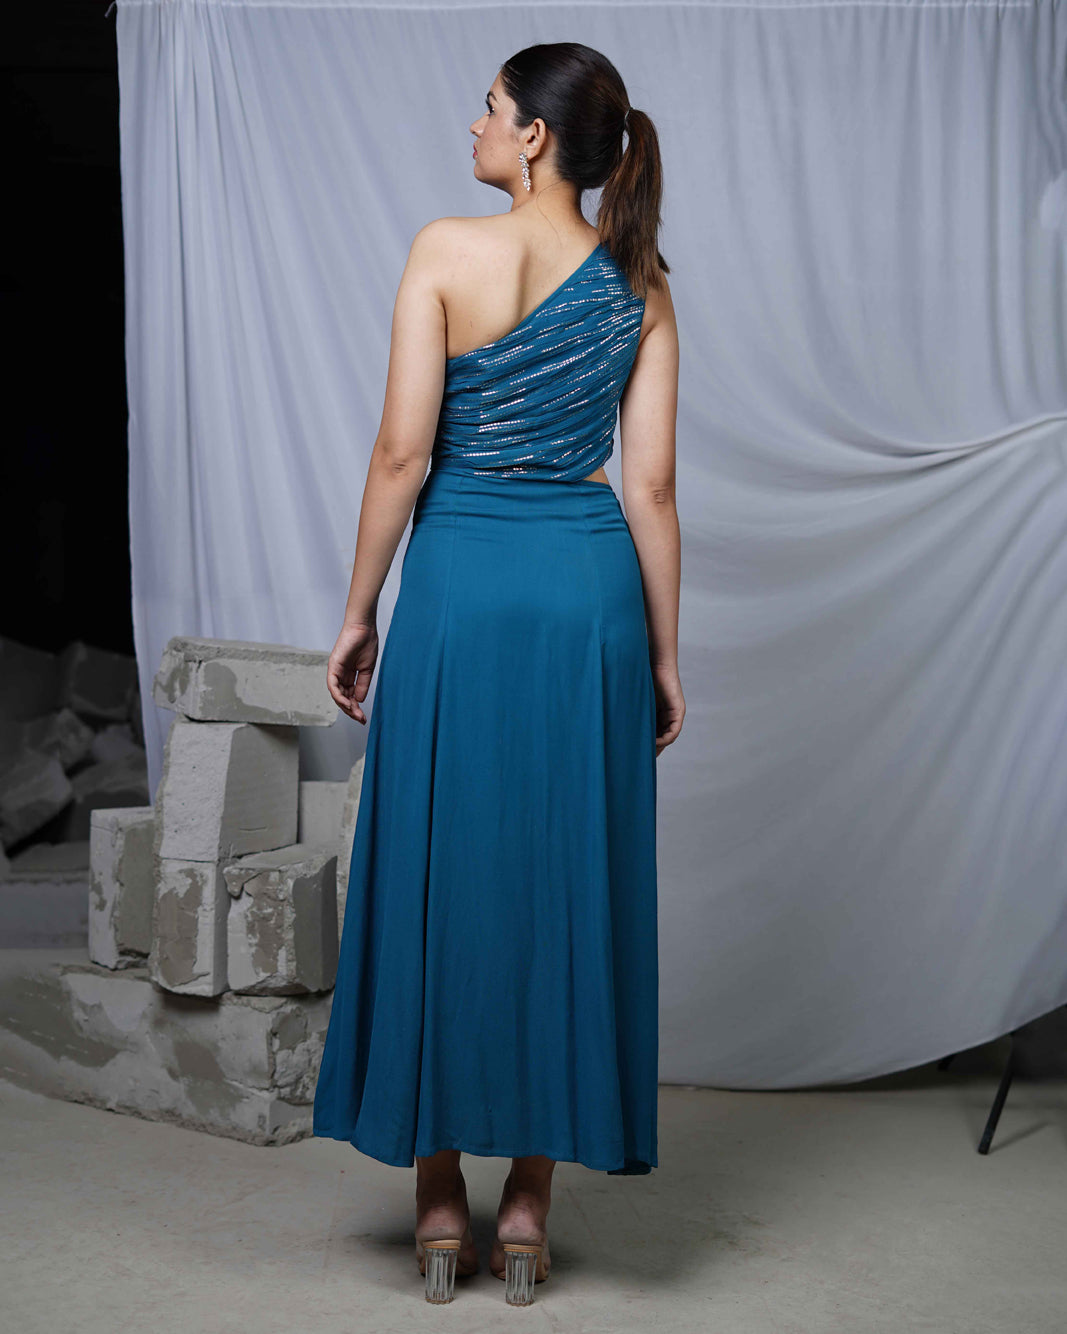 Sitara Teal Womens One Shoulder Maxi Gown Party Dress with Gold Lurex Details